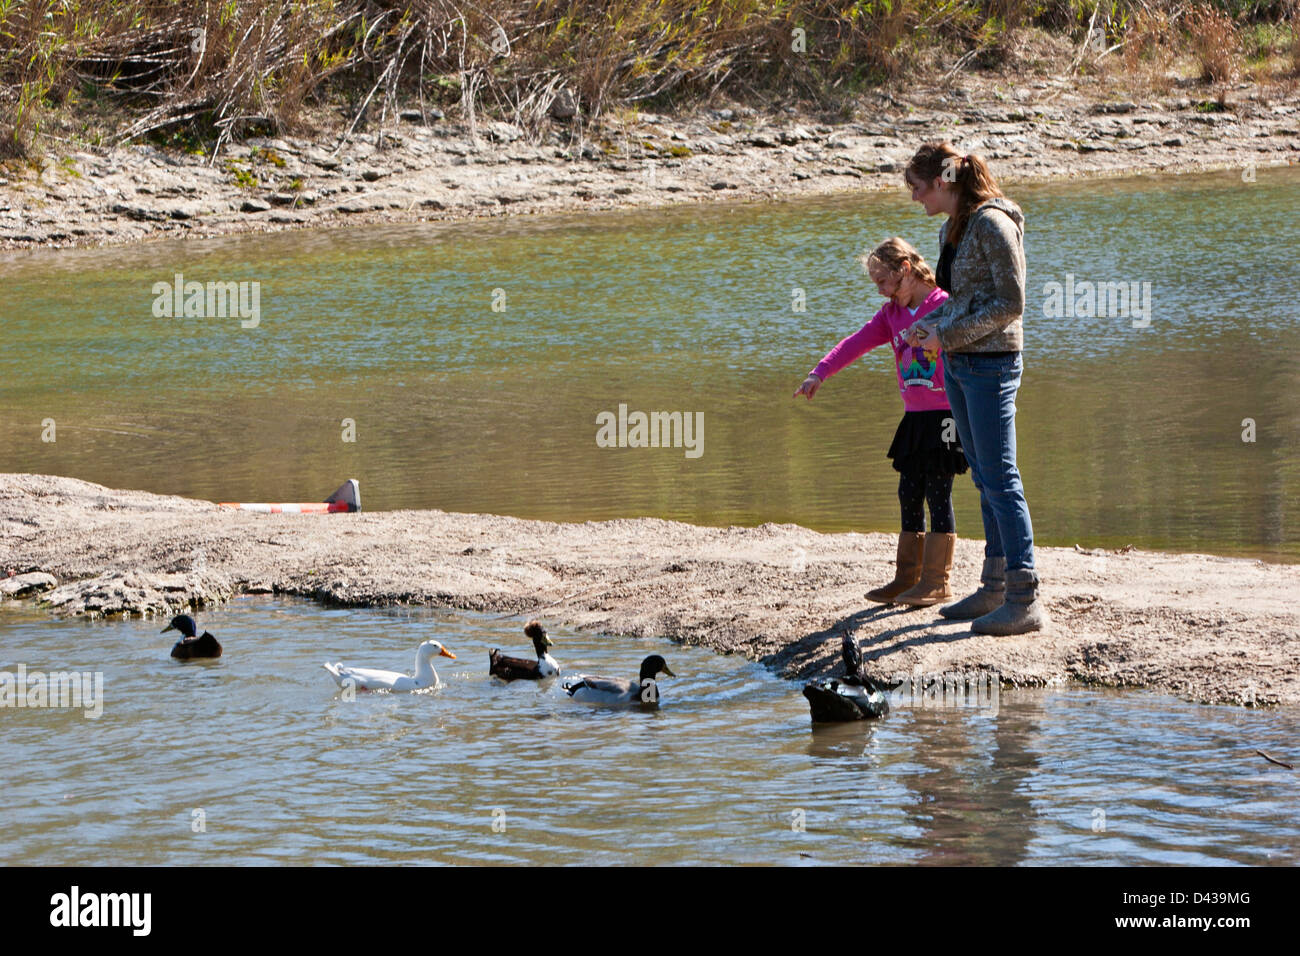 Mother and daughter feeding ducks from sandbar in small river Stock Photo